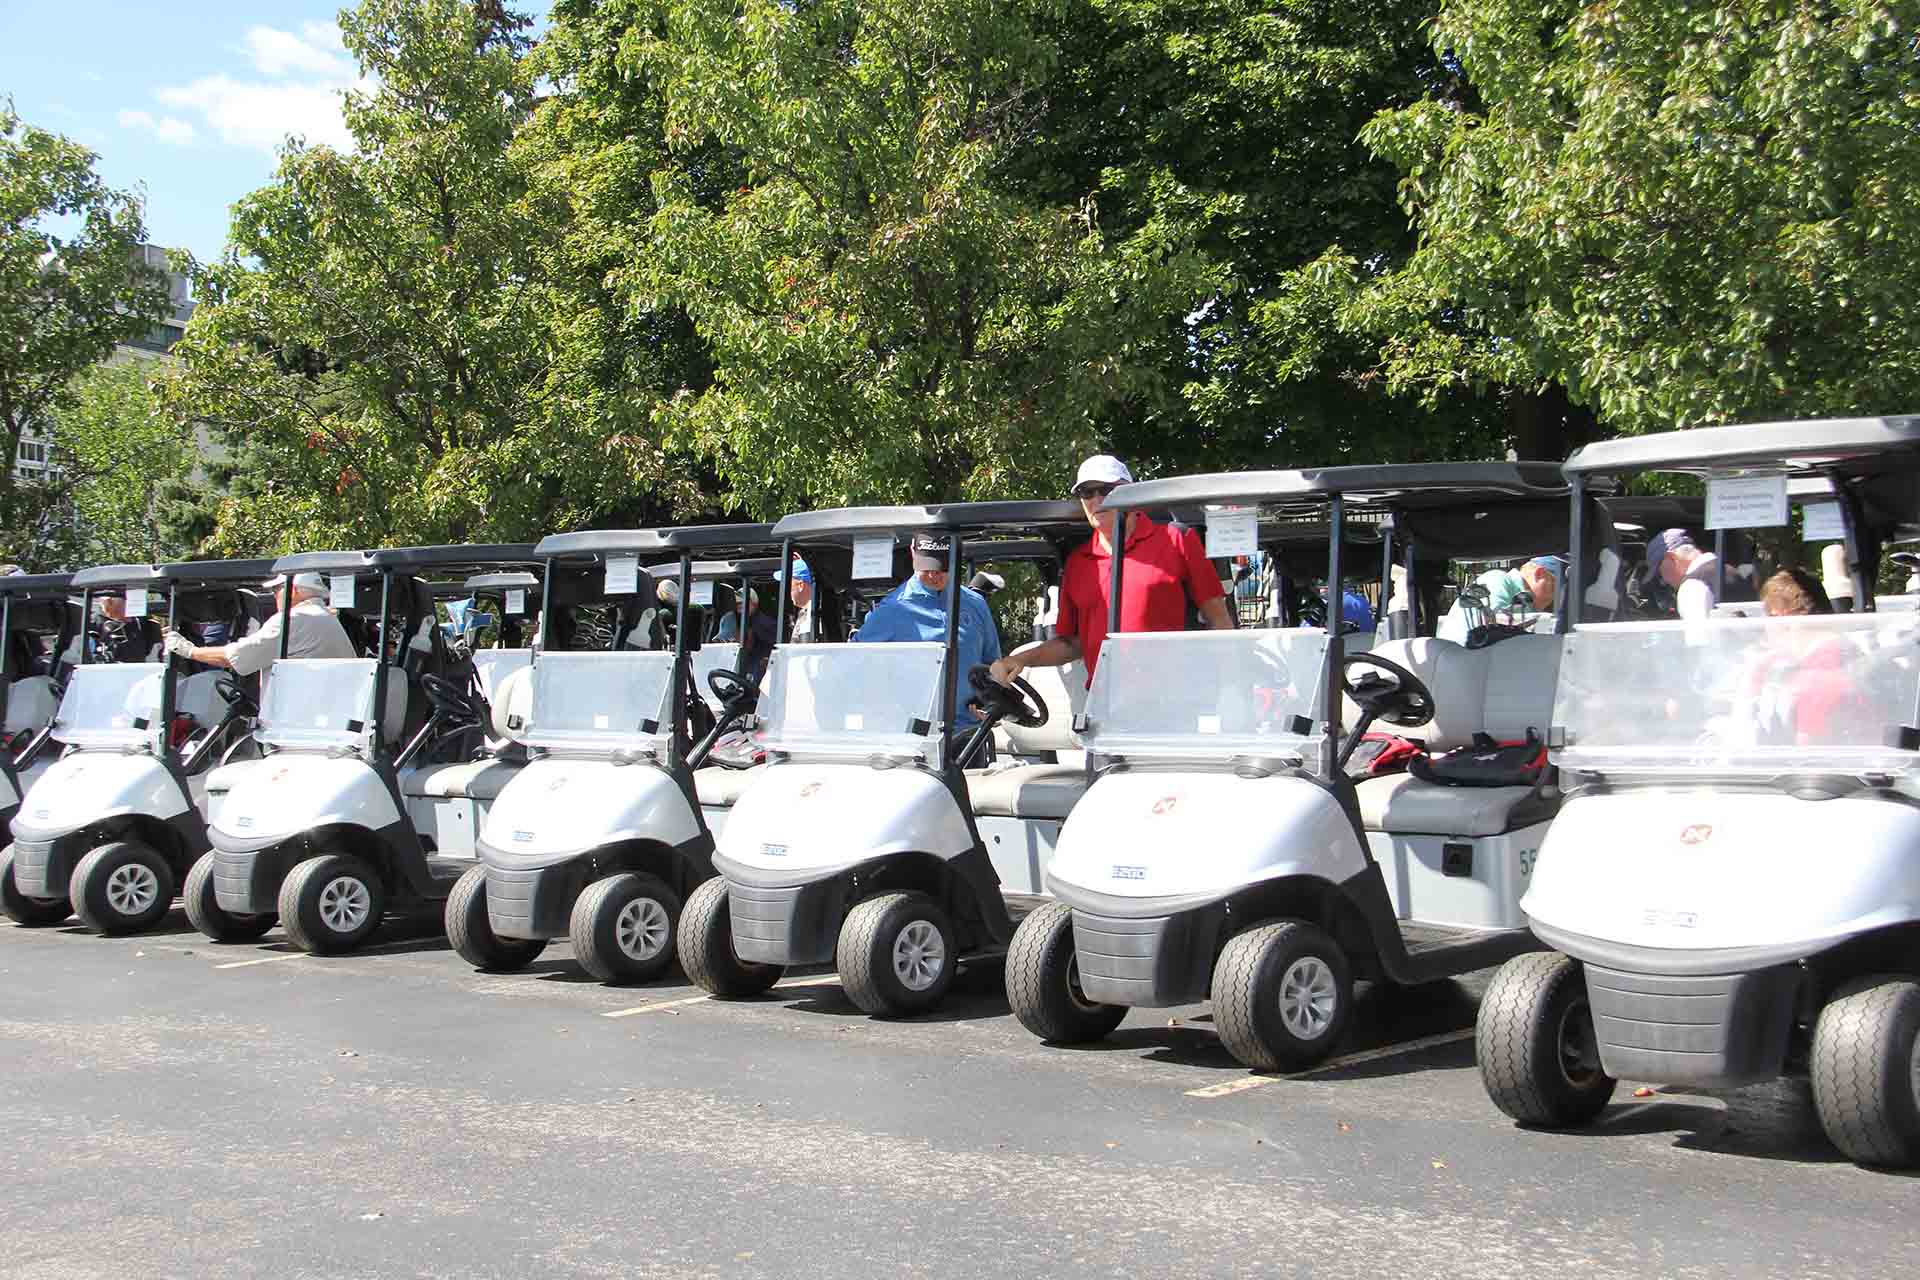 2022-Endowment-Golf-Classic-golf-carts-with-people-next-to-it